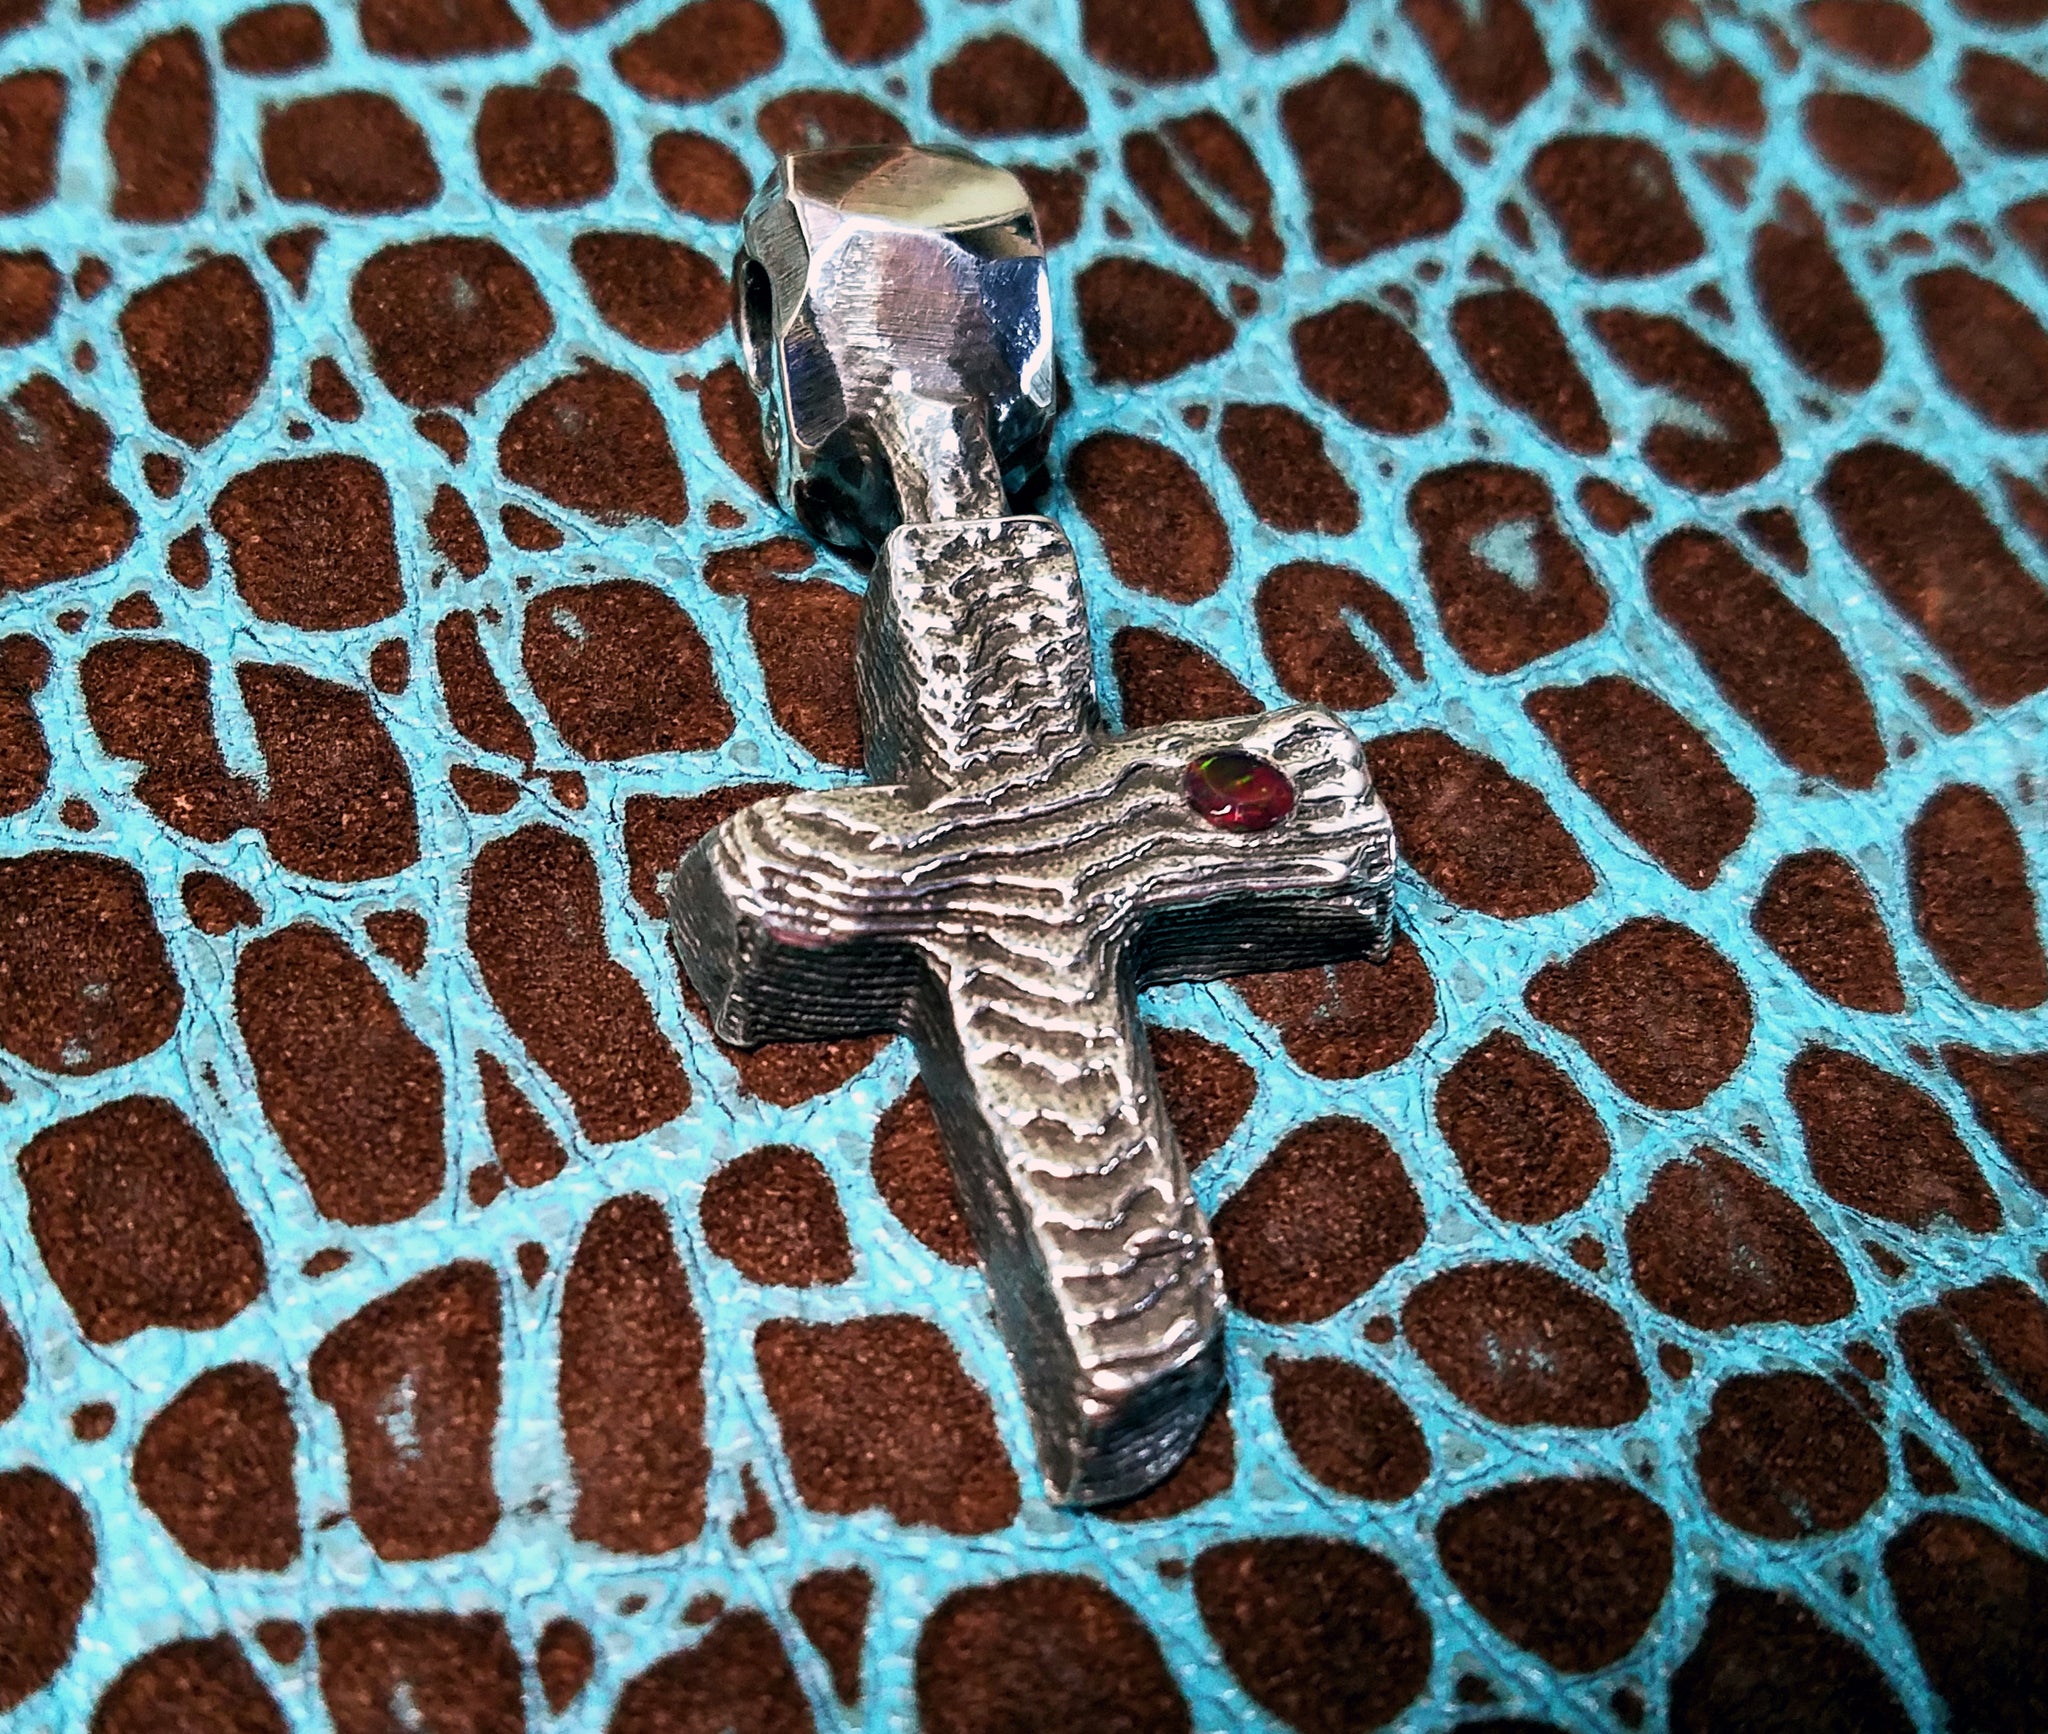 'Cross' Hand-carved Hand-poured Cuttlefish Solid Sterling Silver Pendant #1 by Phantom